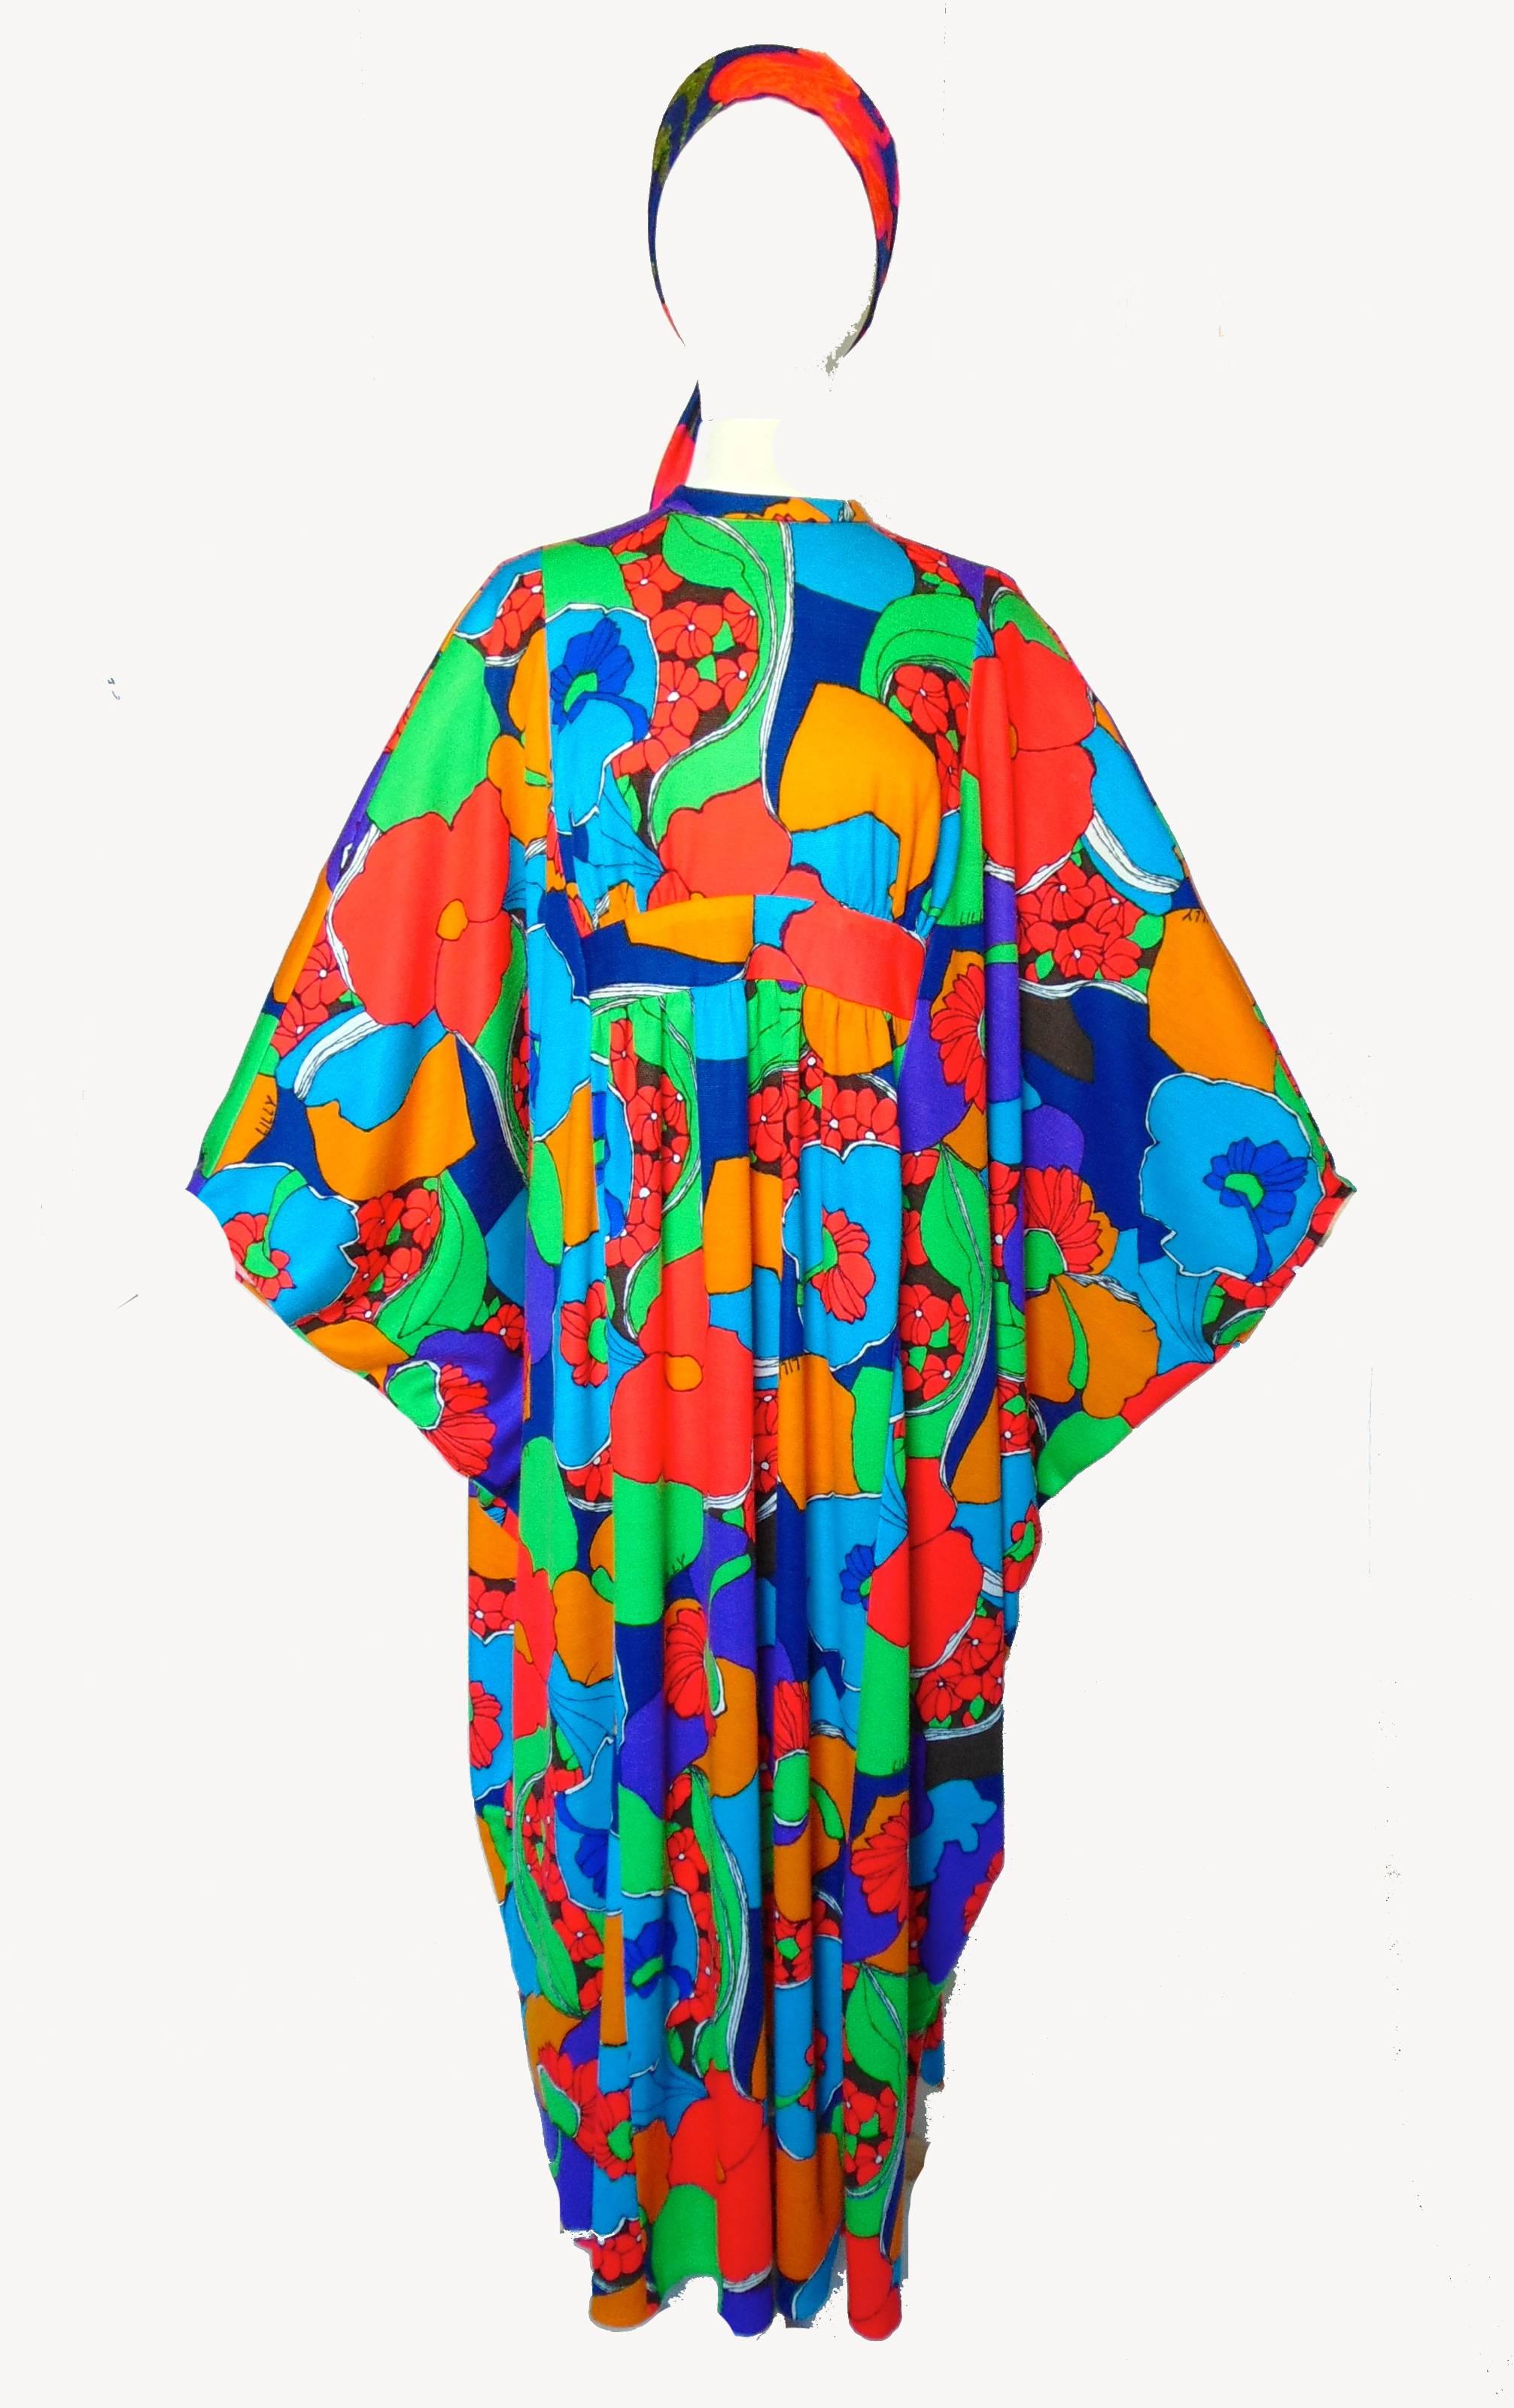 Women's Lilly Pulitzer Kaftan Dress Vibrant Graphic Floral Print One Size Fits Most 70s